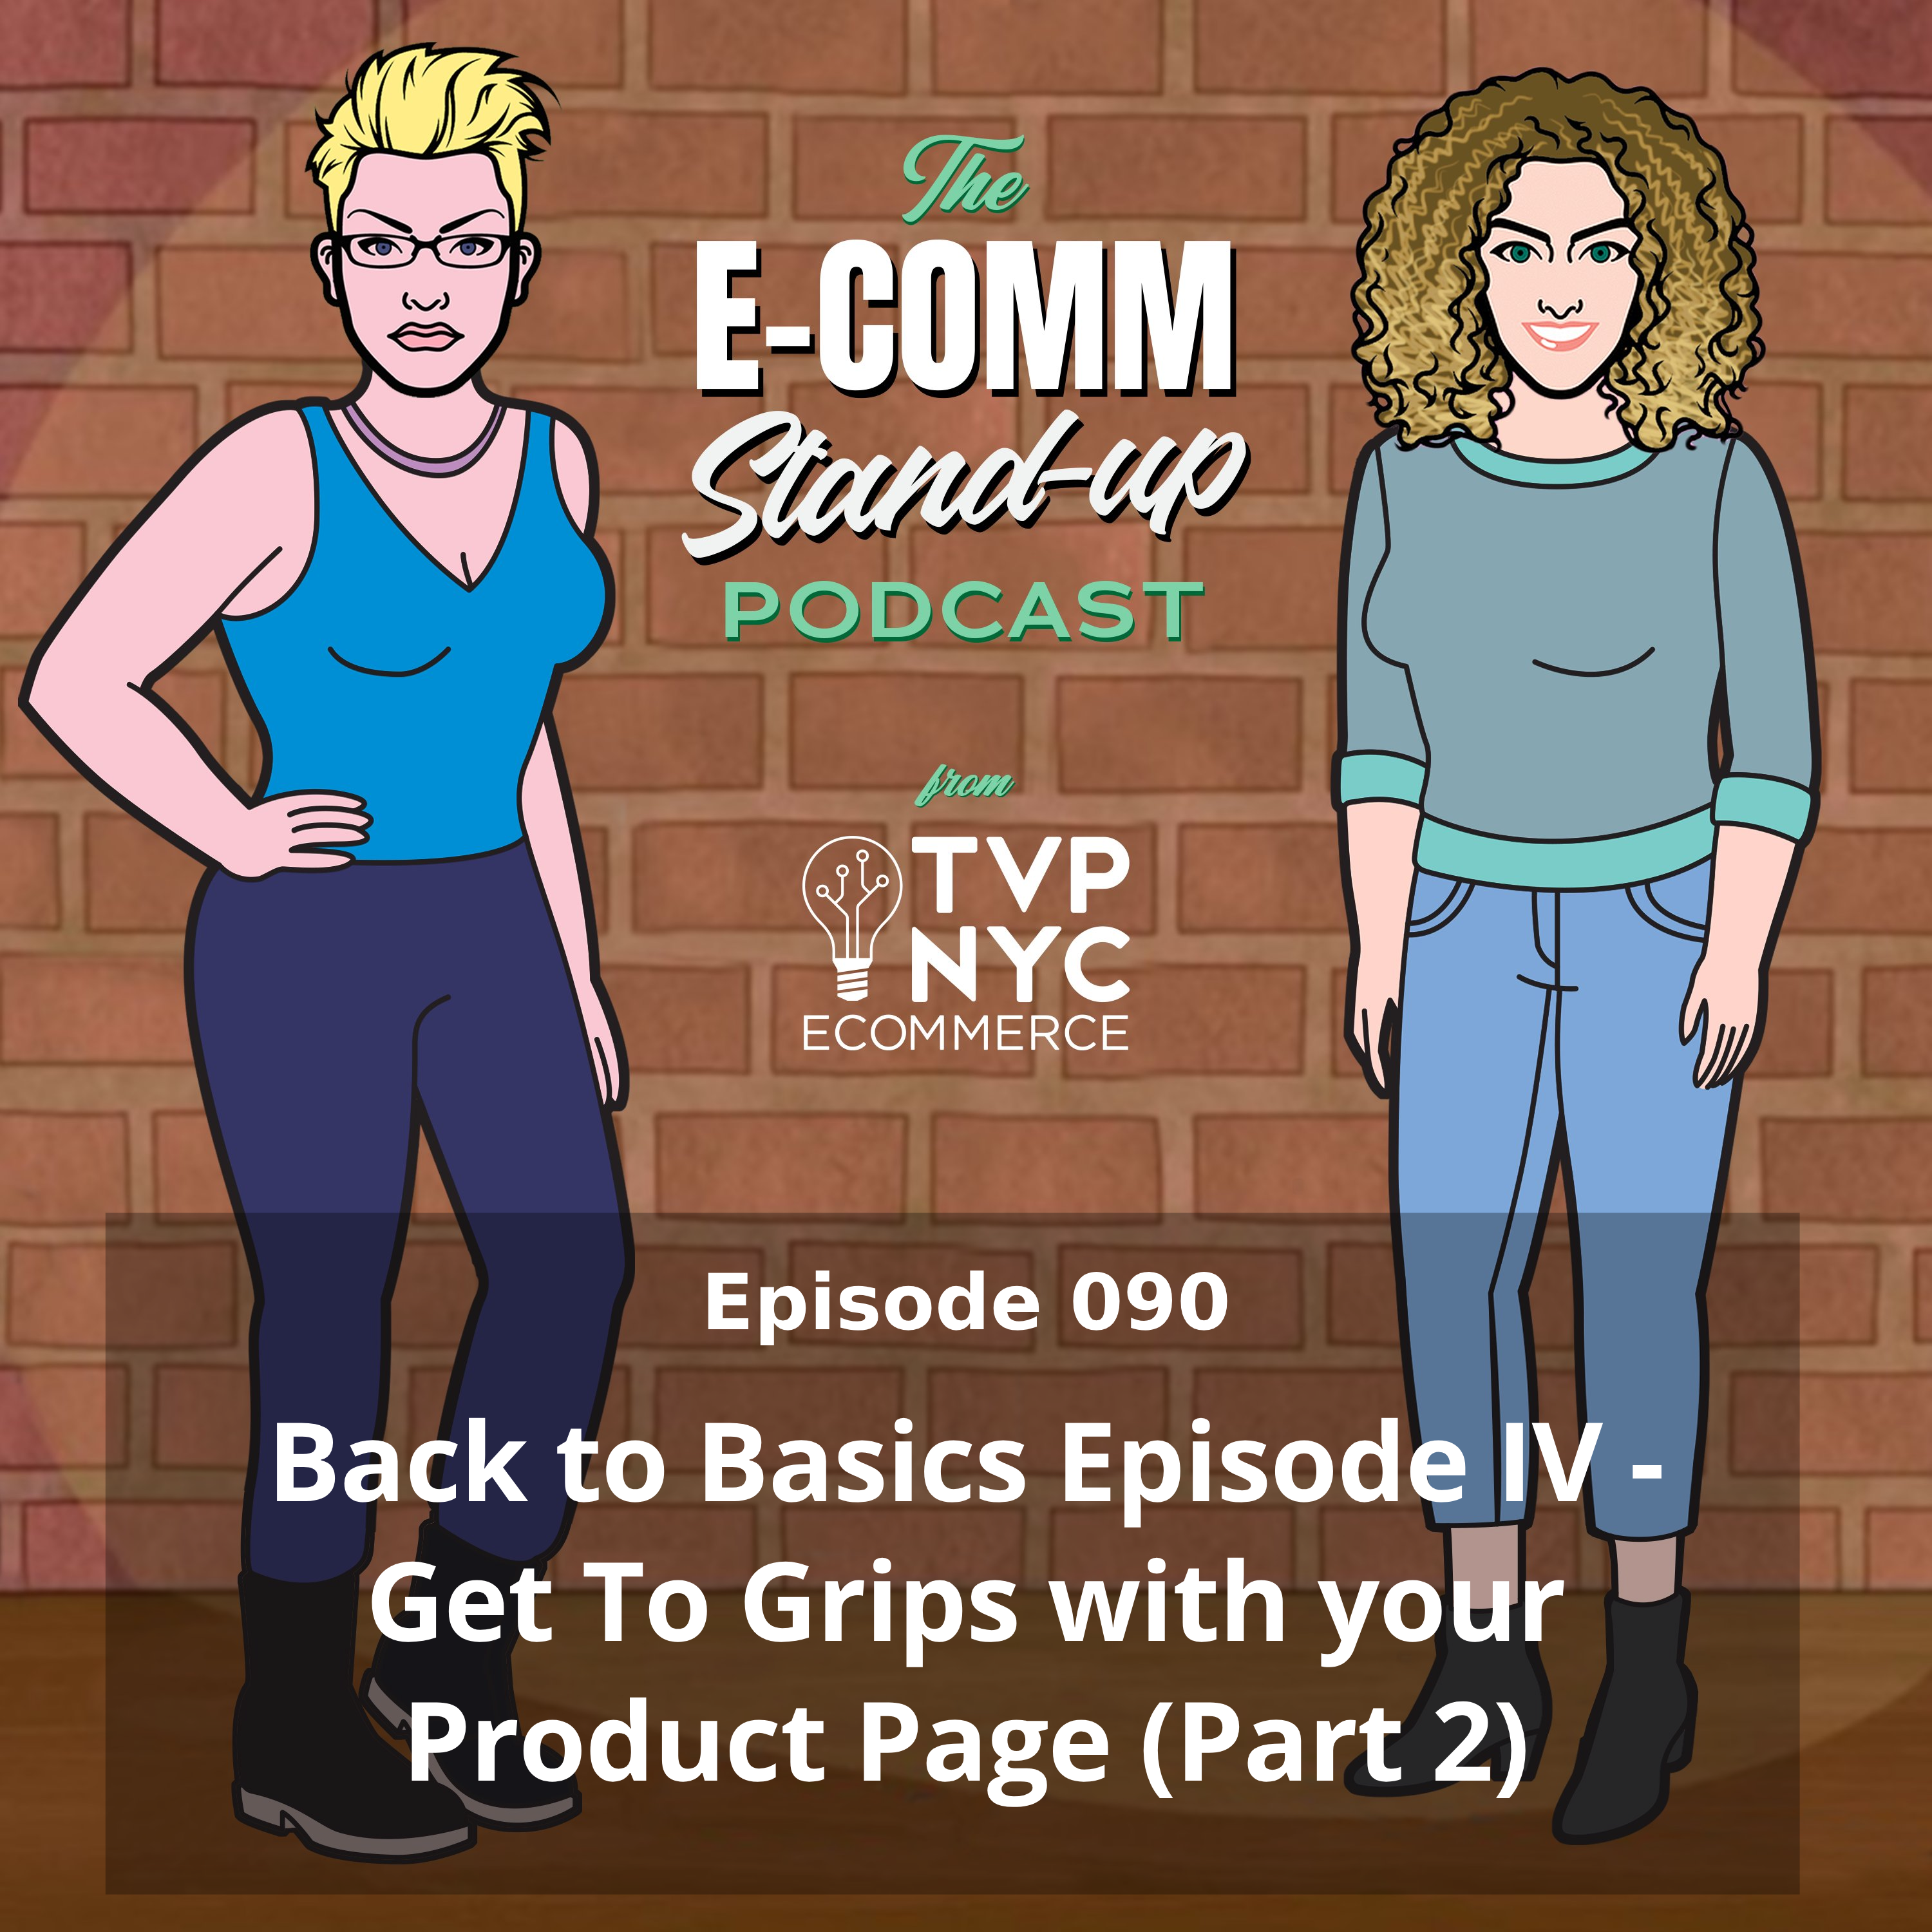 Back to Basics Episode IV - Get To Grips with your Product Page (Part 2)